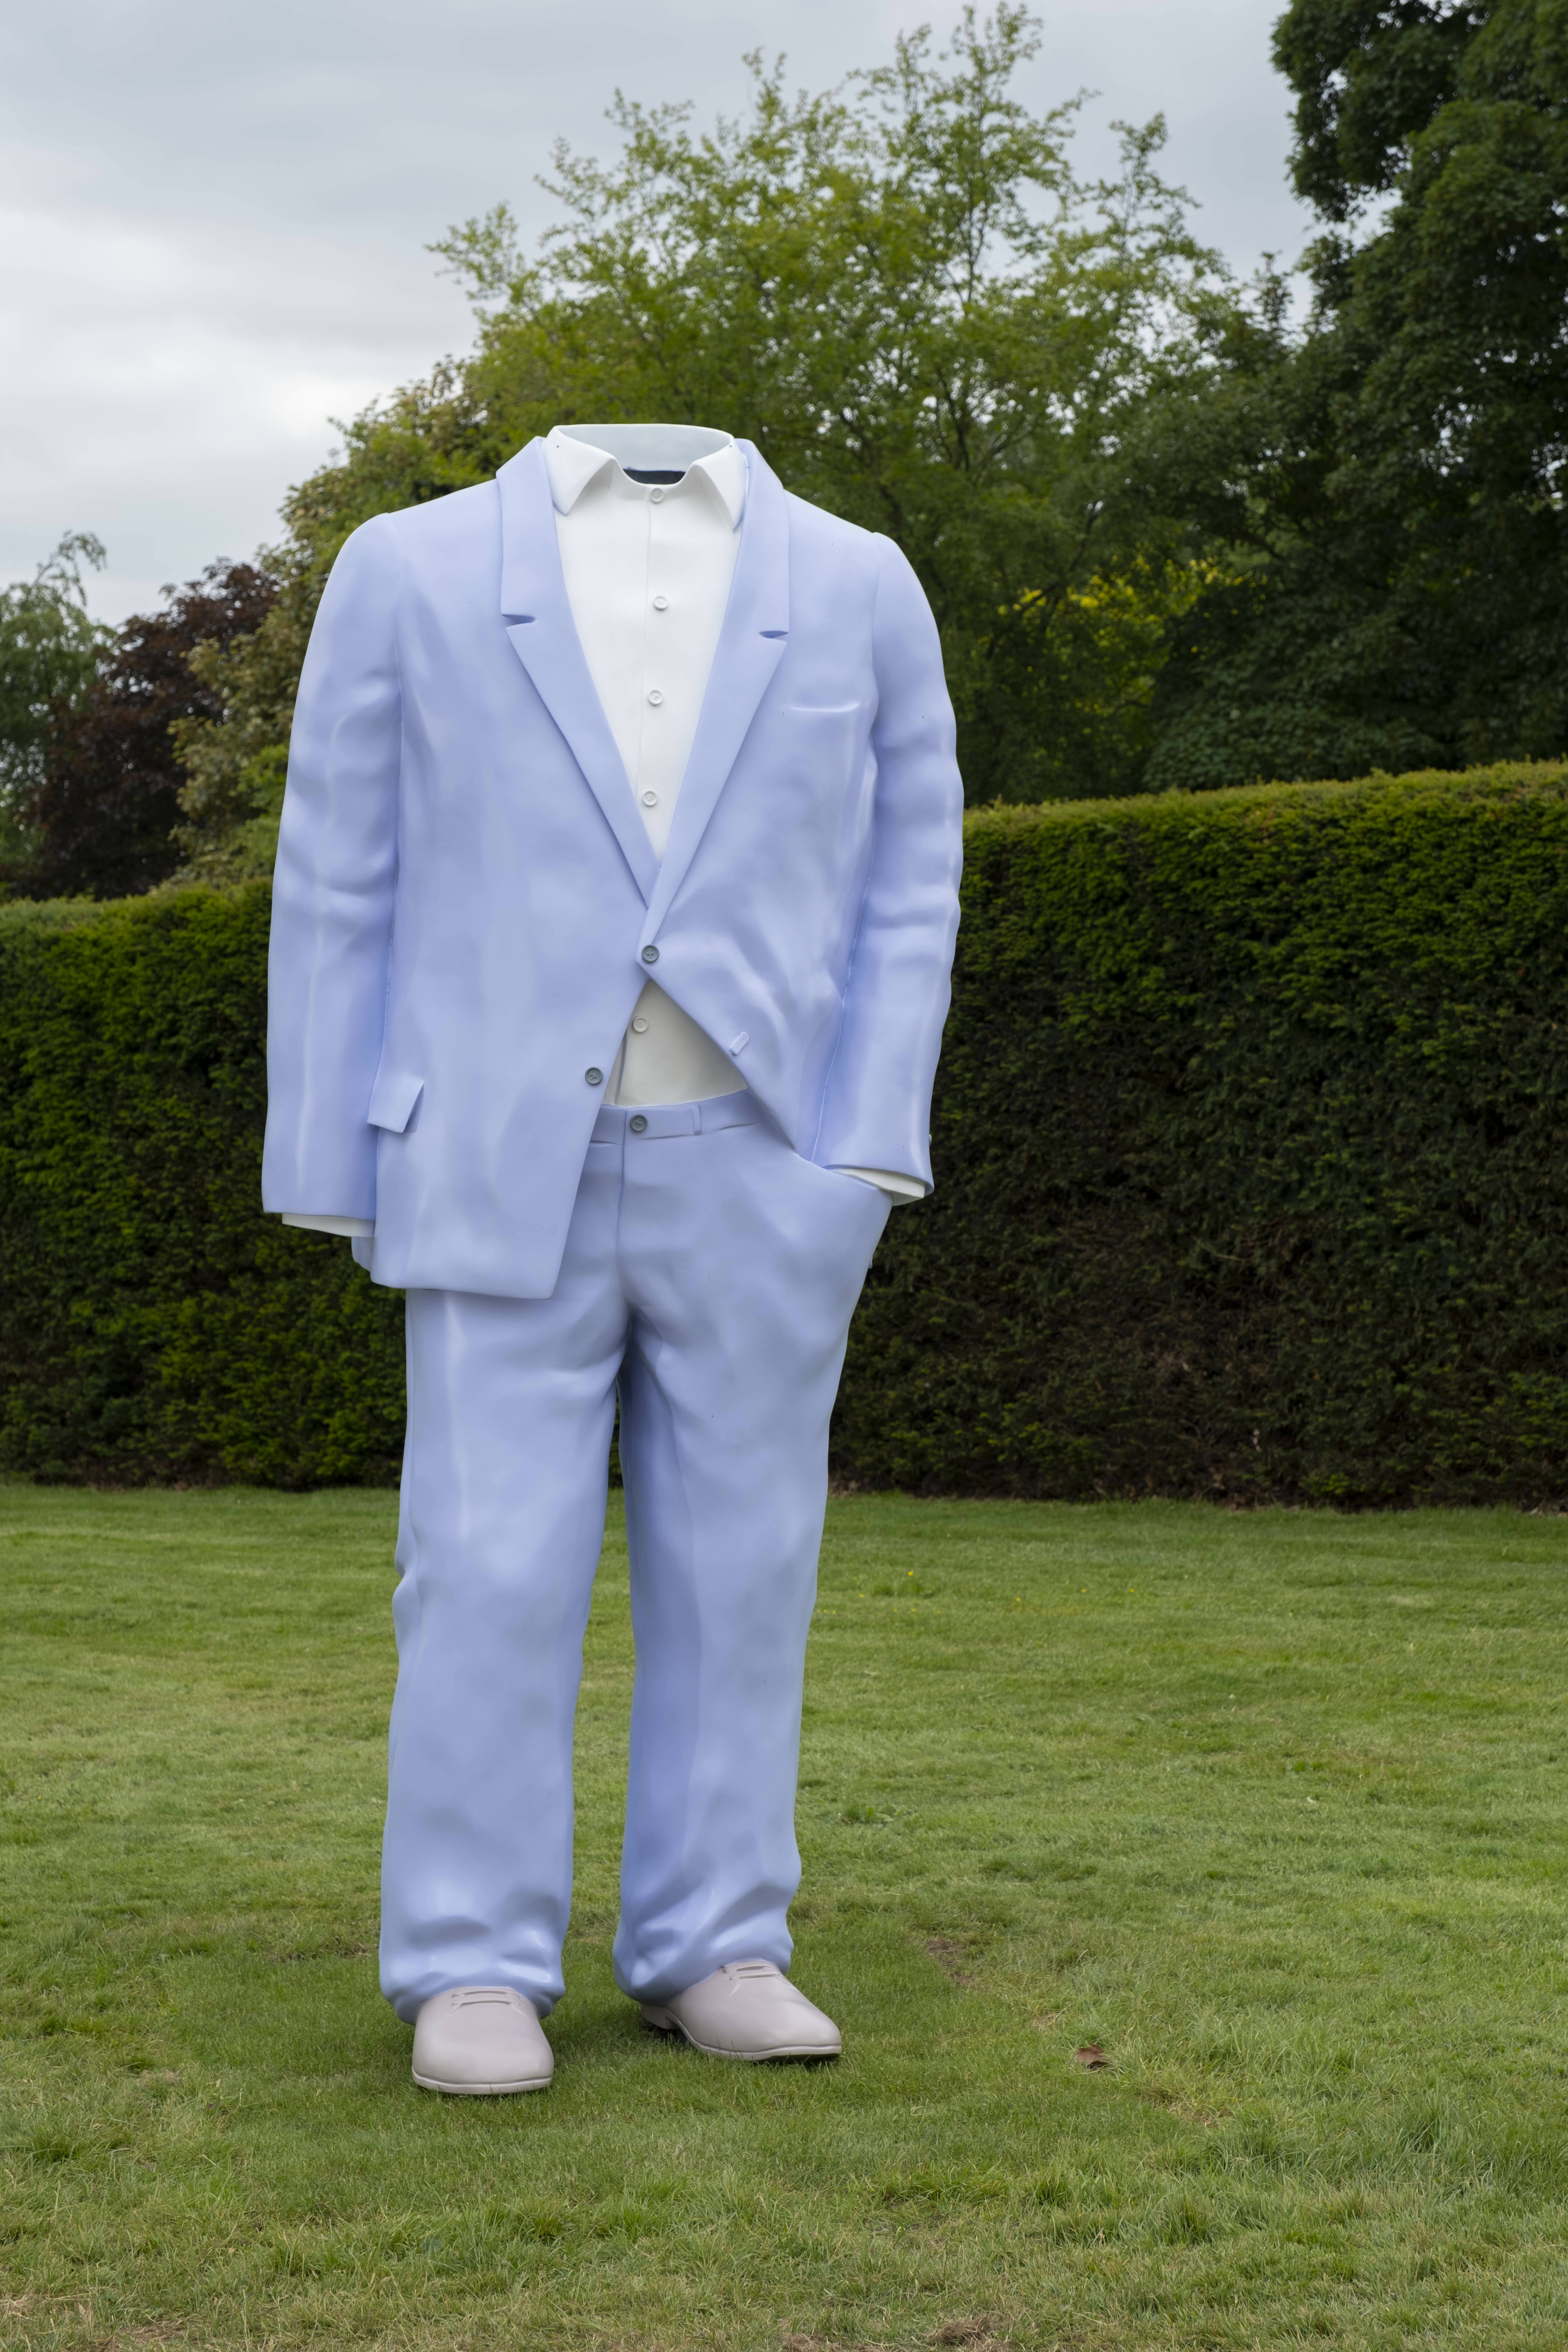 Sculpture of a headless person dressed in a purple suit and white shirt stood on grass.